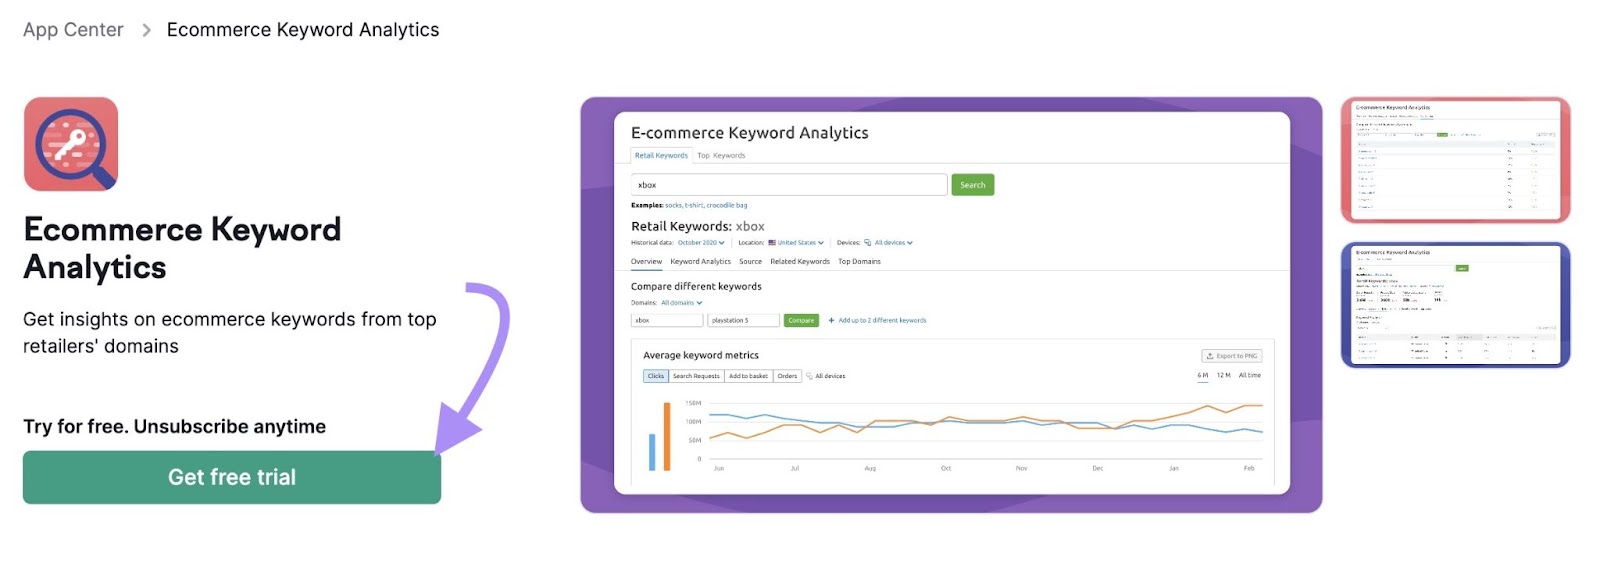 "Get free trial" with Ecommerce Keywords Analytics